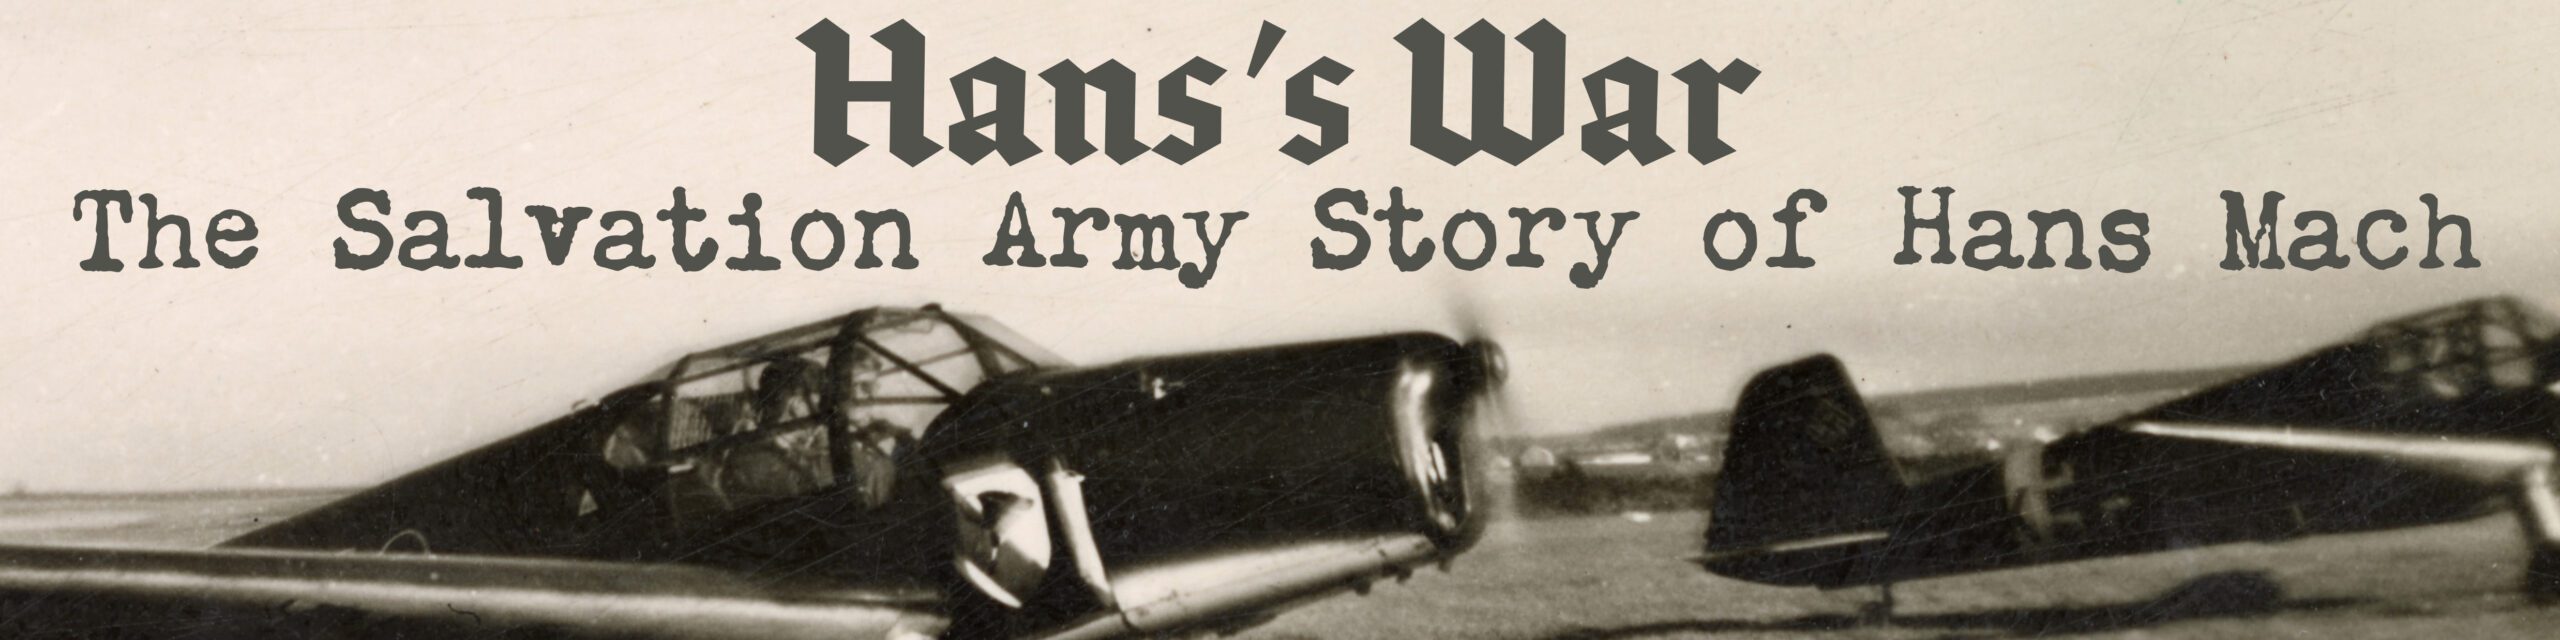 Black and White graphic label showing two single engine trainer aircraft from the 1940s with text "Hans's War: The Salvation Army Story of Hans Mach"